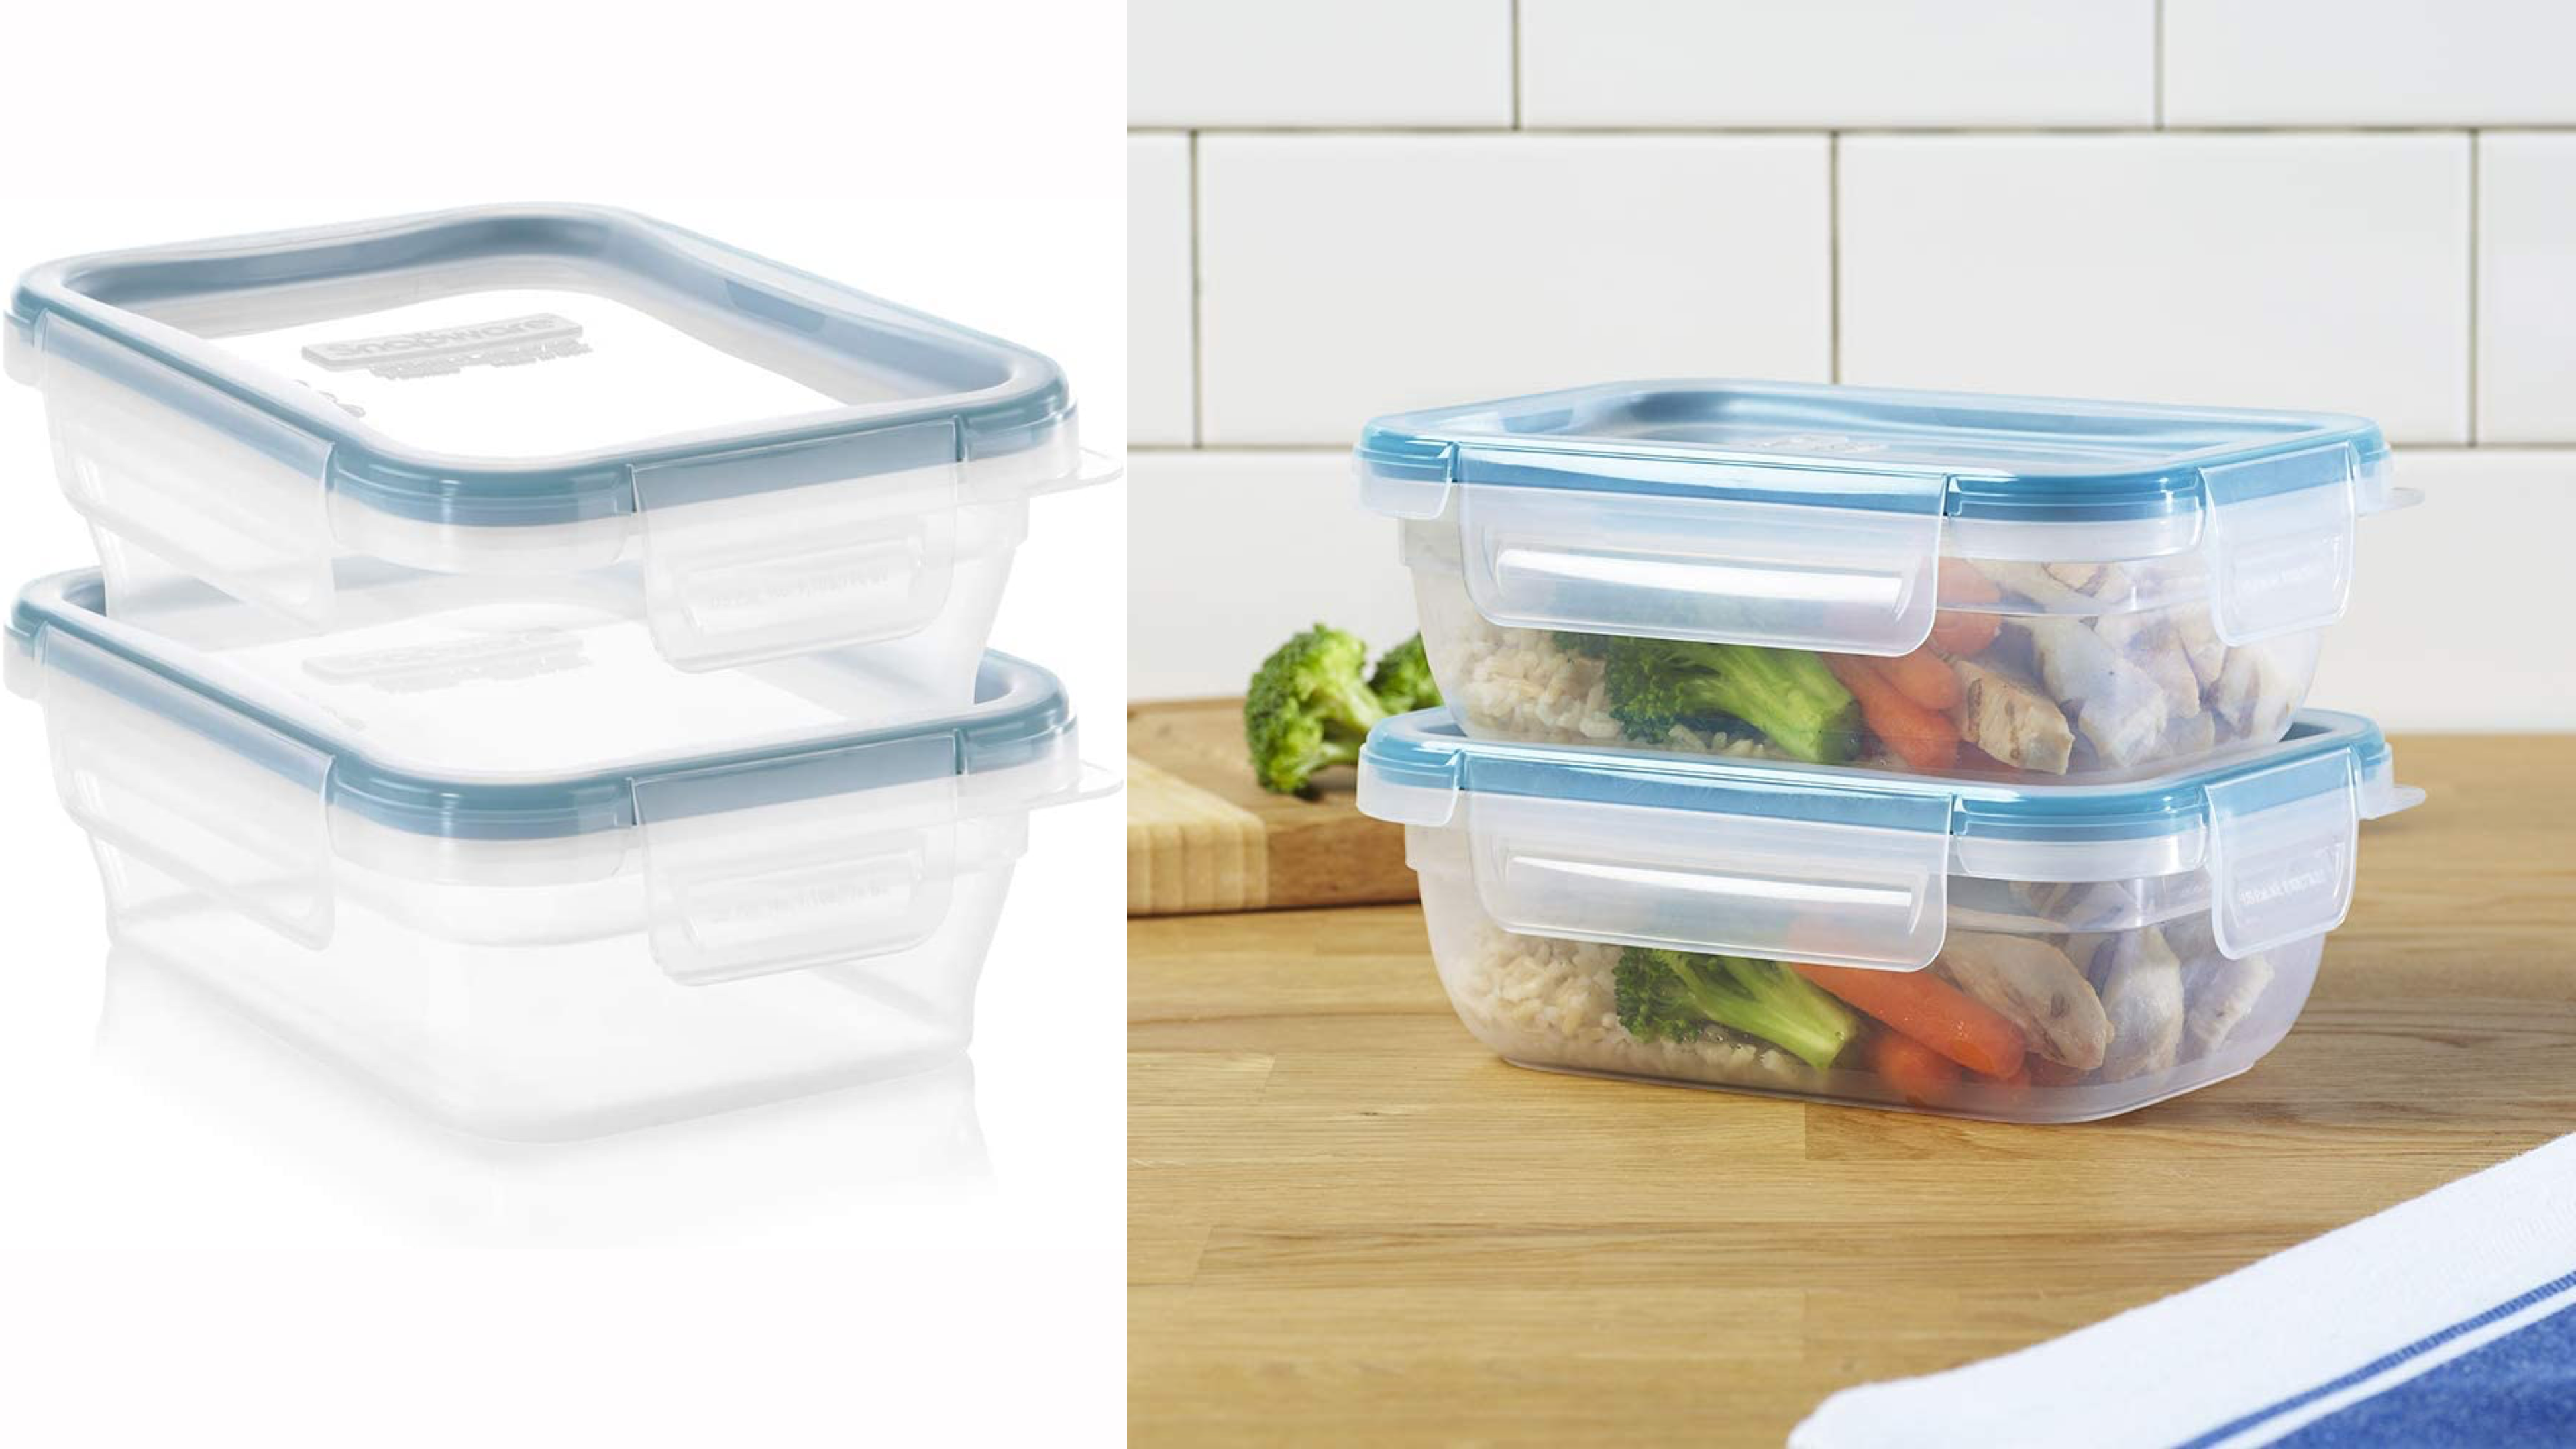 leftover containers that snap closed to keep food fresh